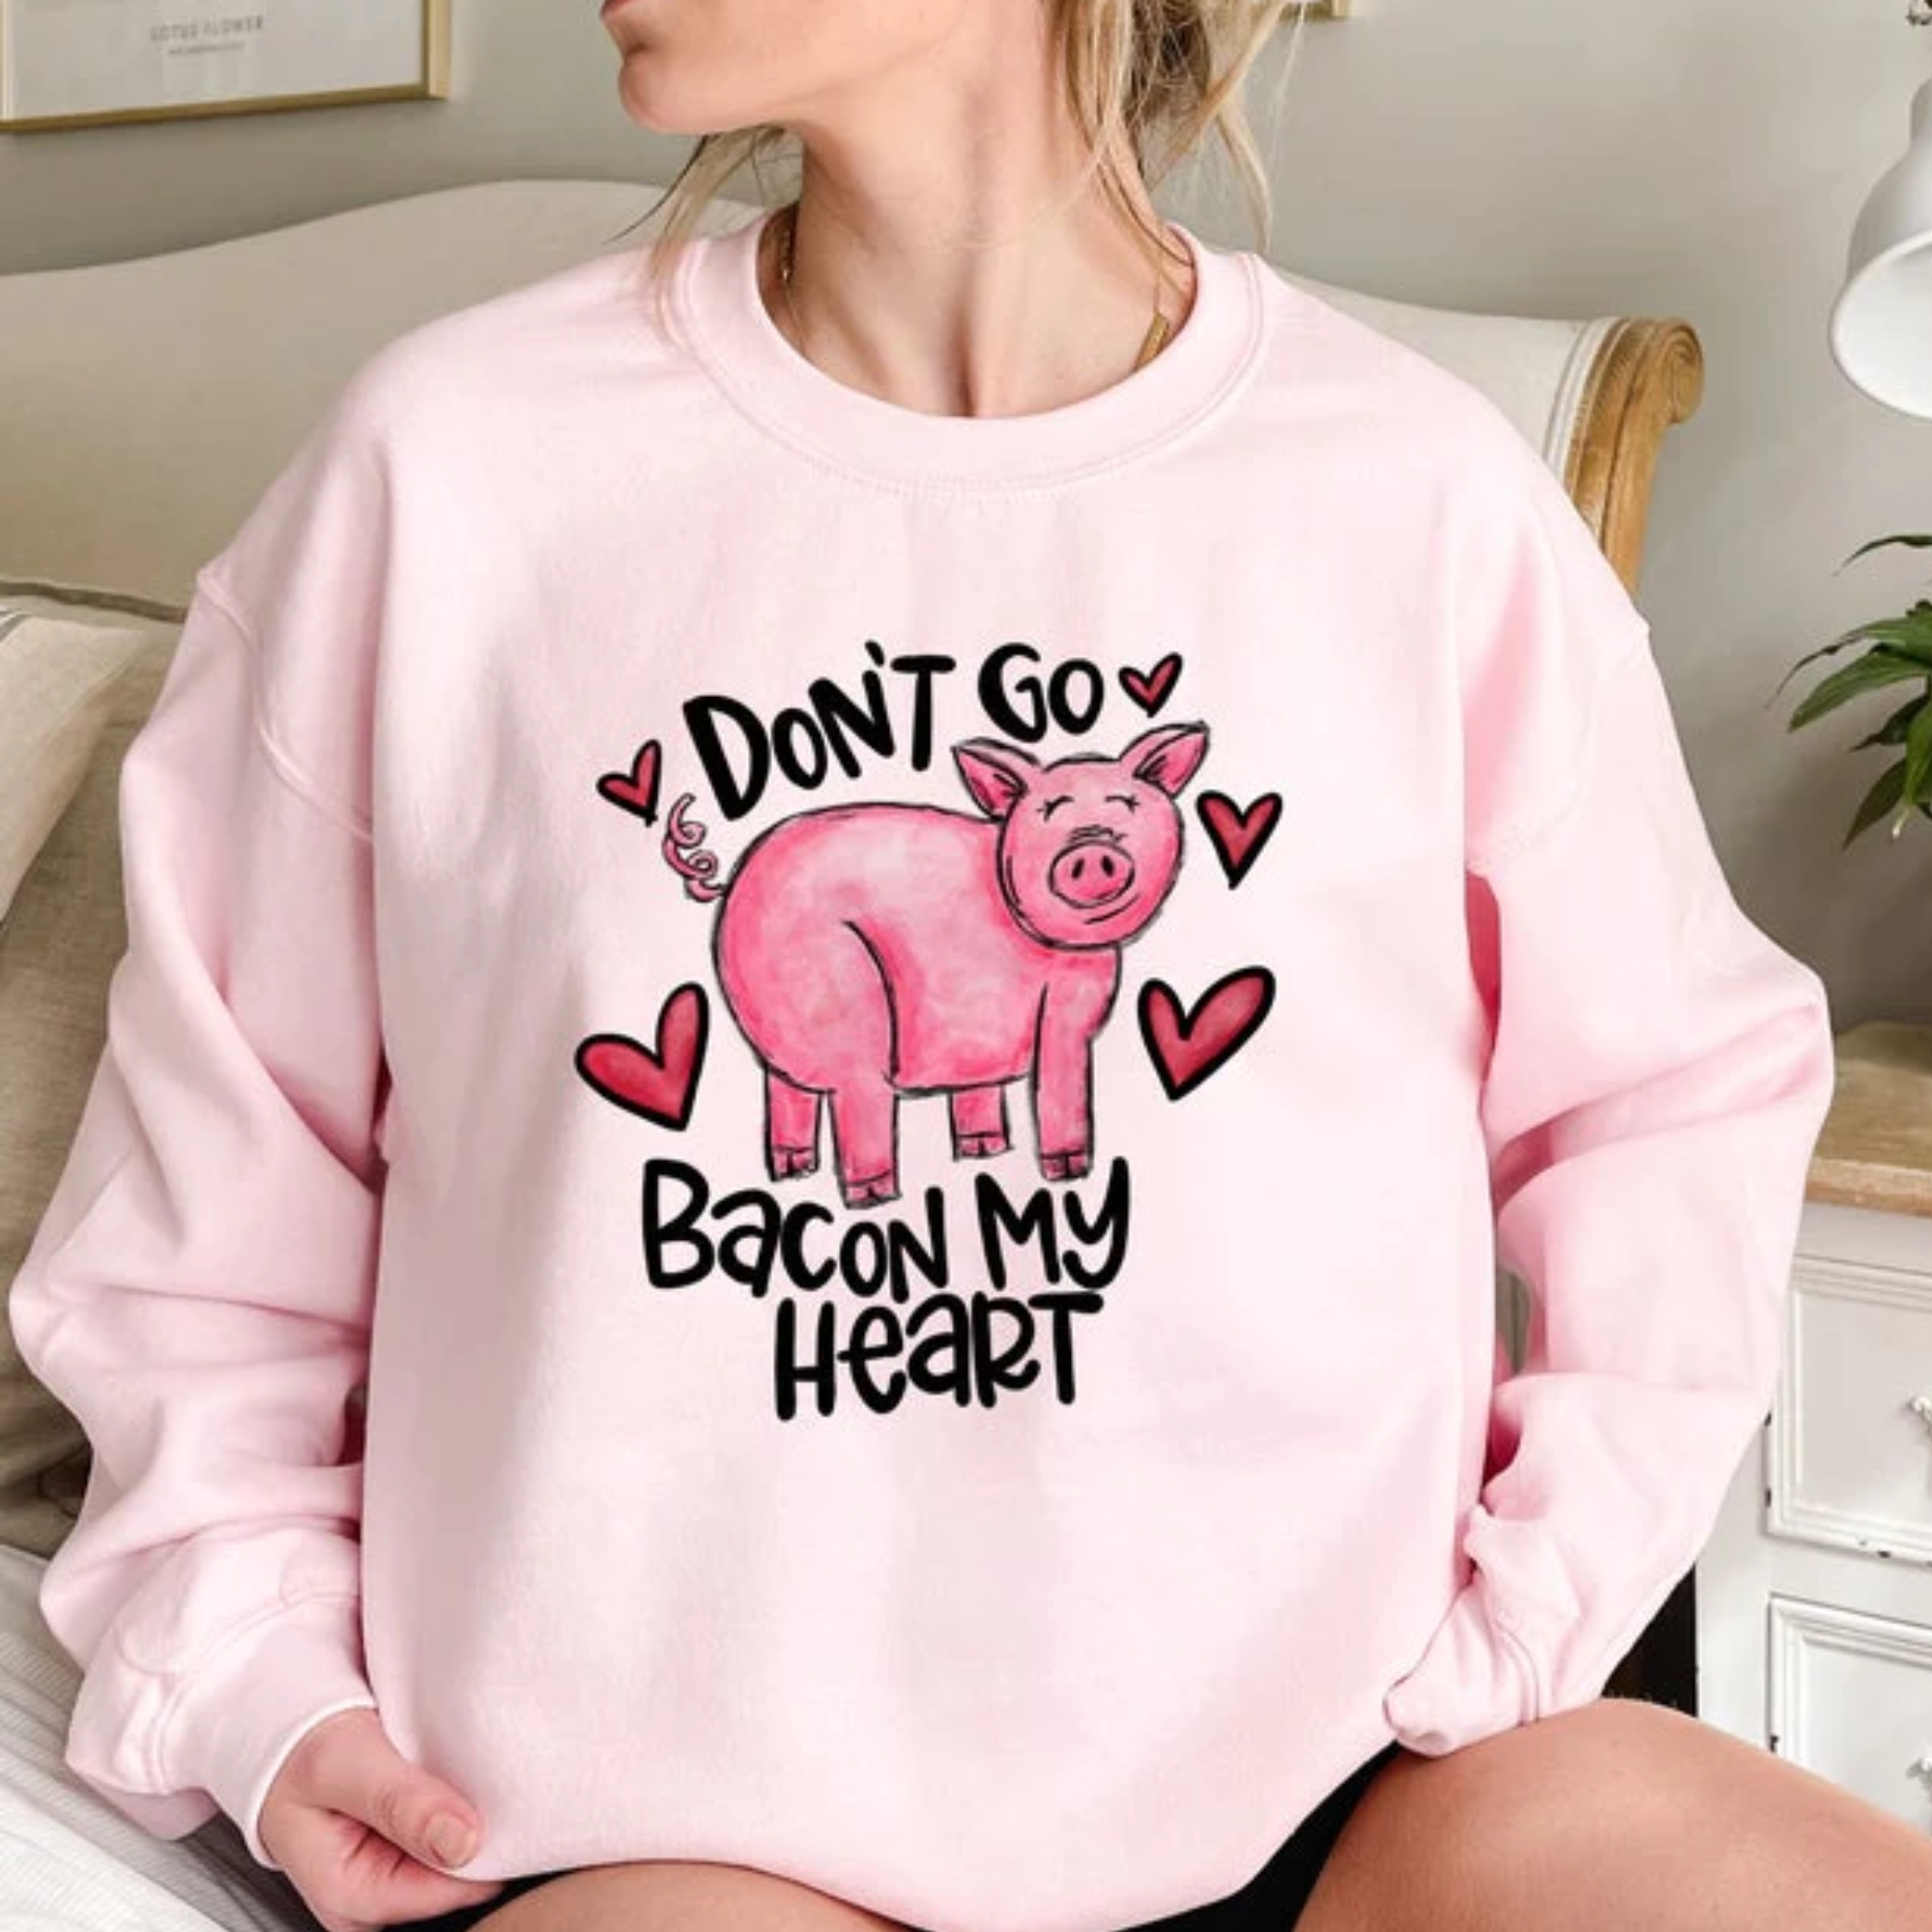 Don't Go Bacon My Heart - Gift For Couple, Wife, Girlfriend - Unisex Shirt